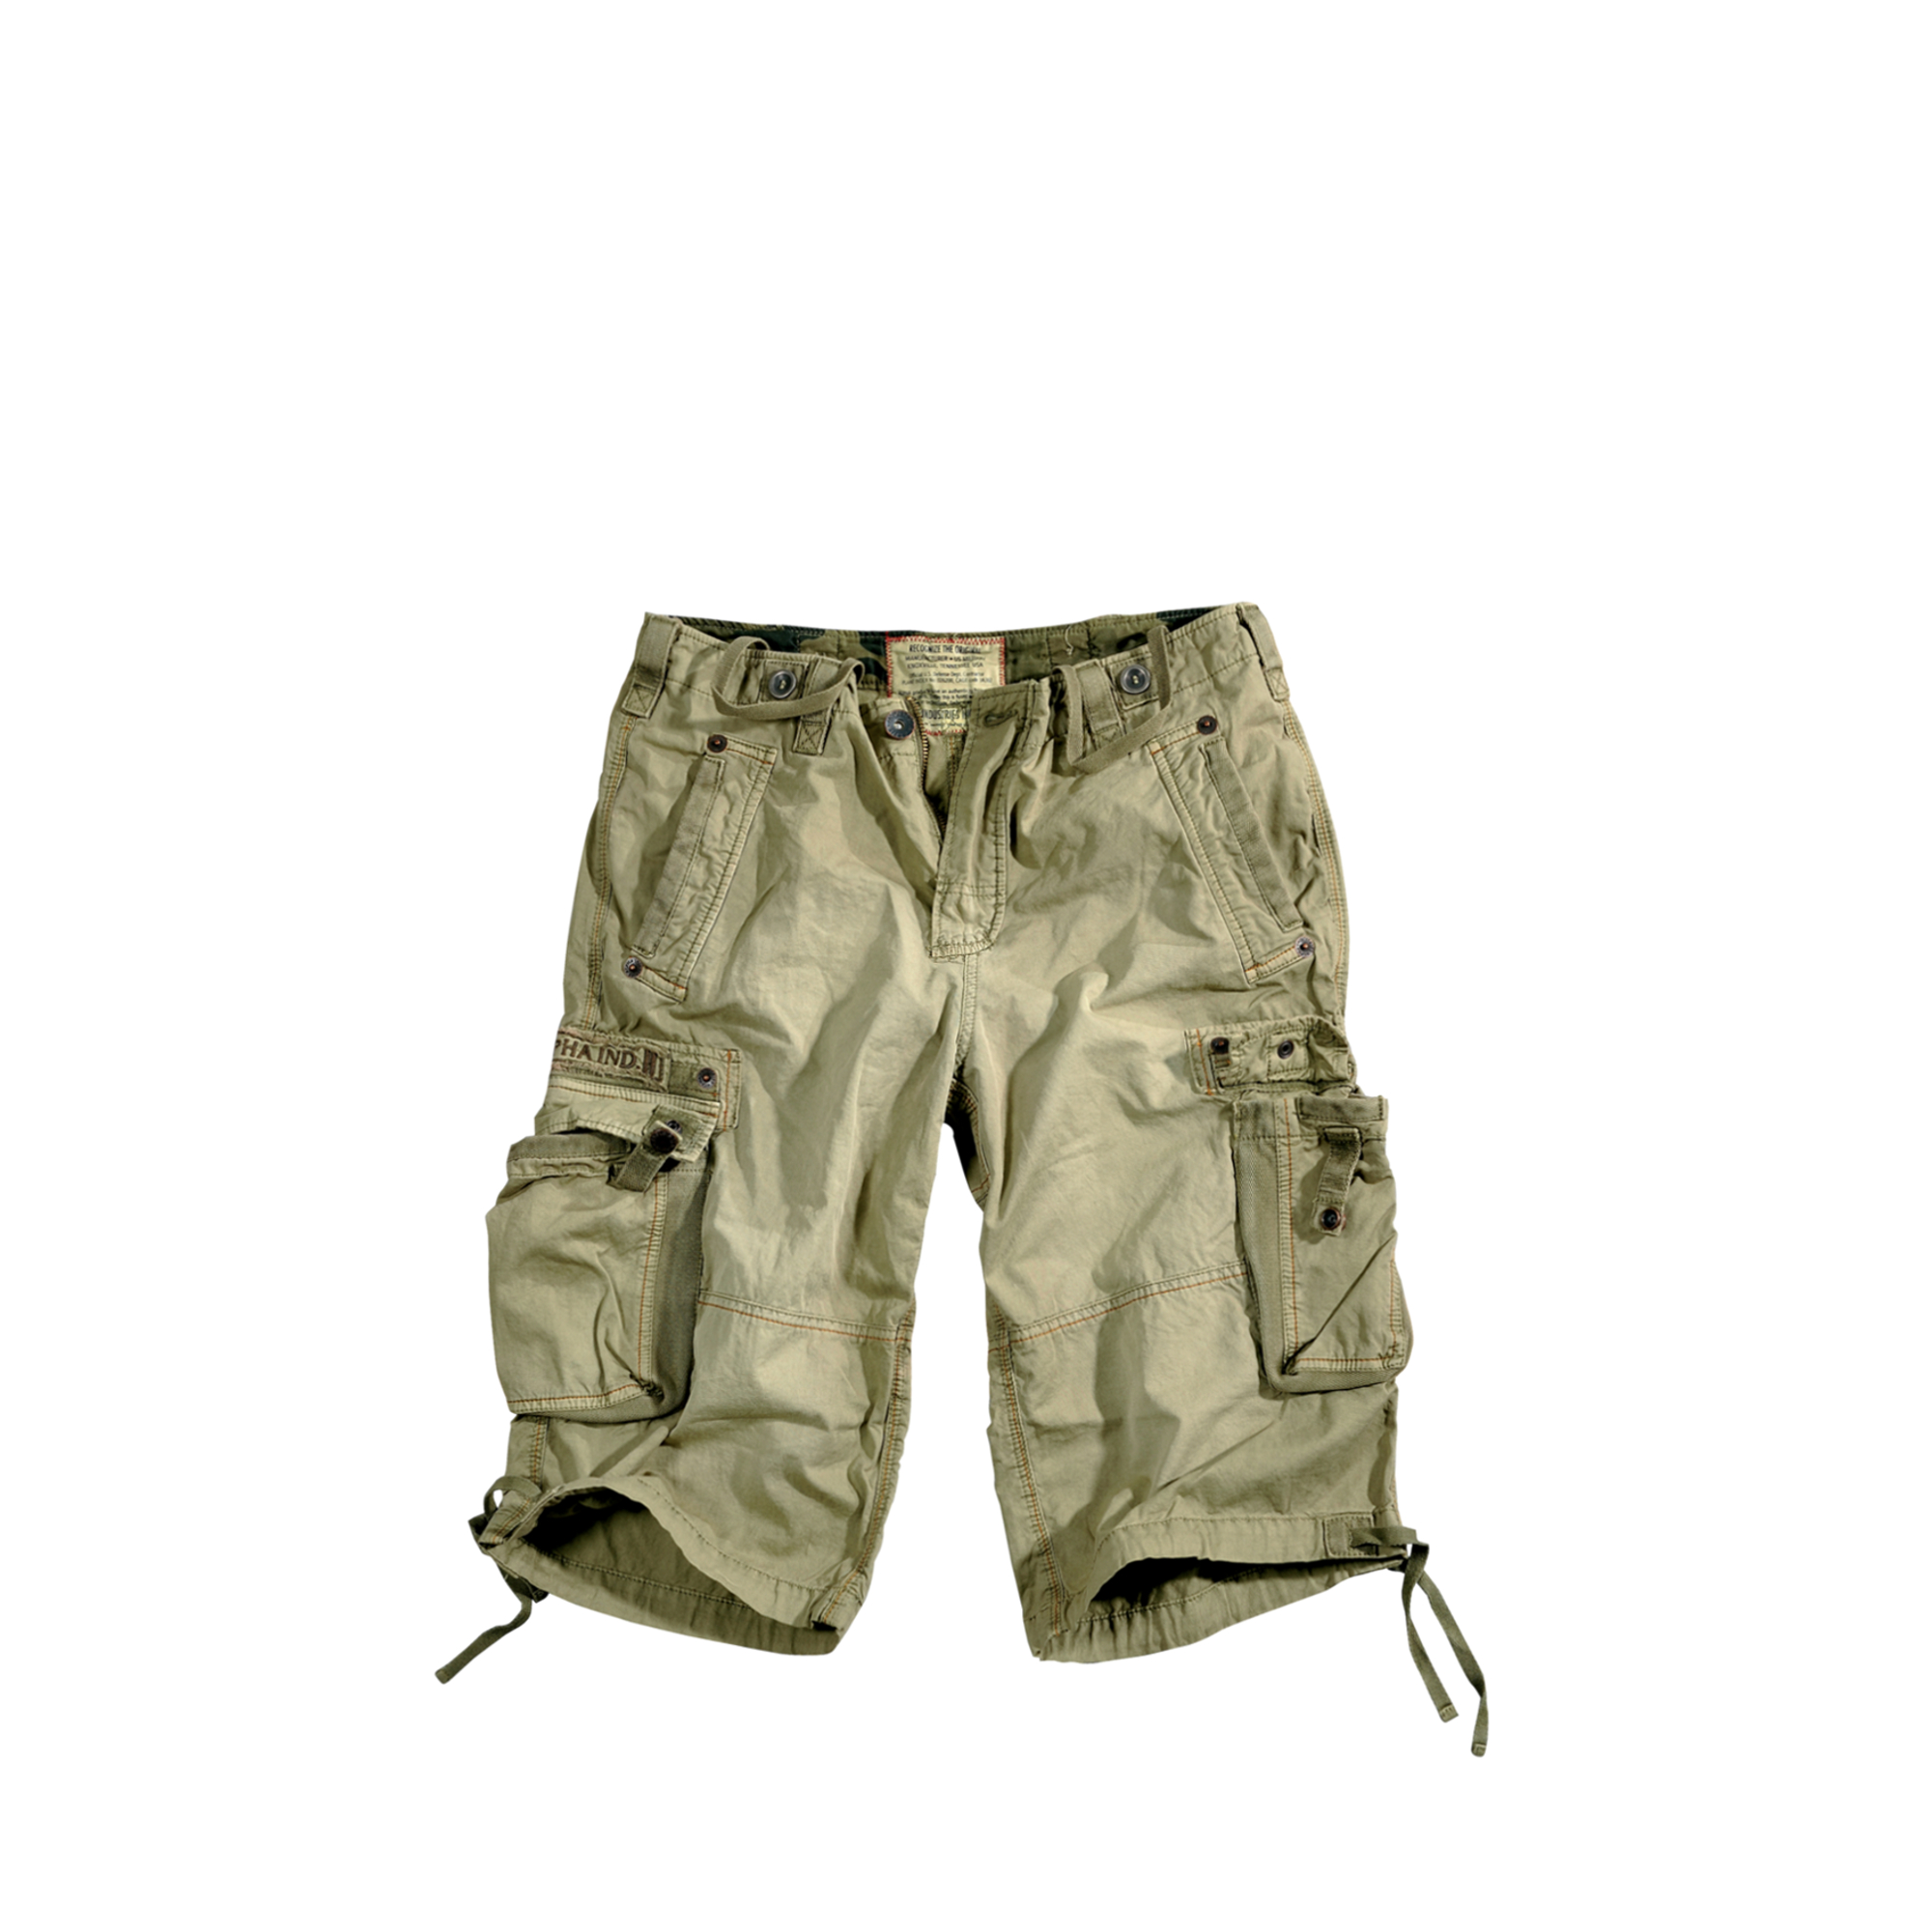 SHORTS Archives - Alpha Industries Cyprus